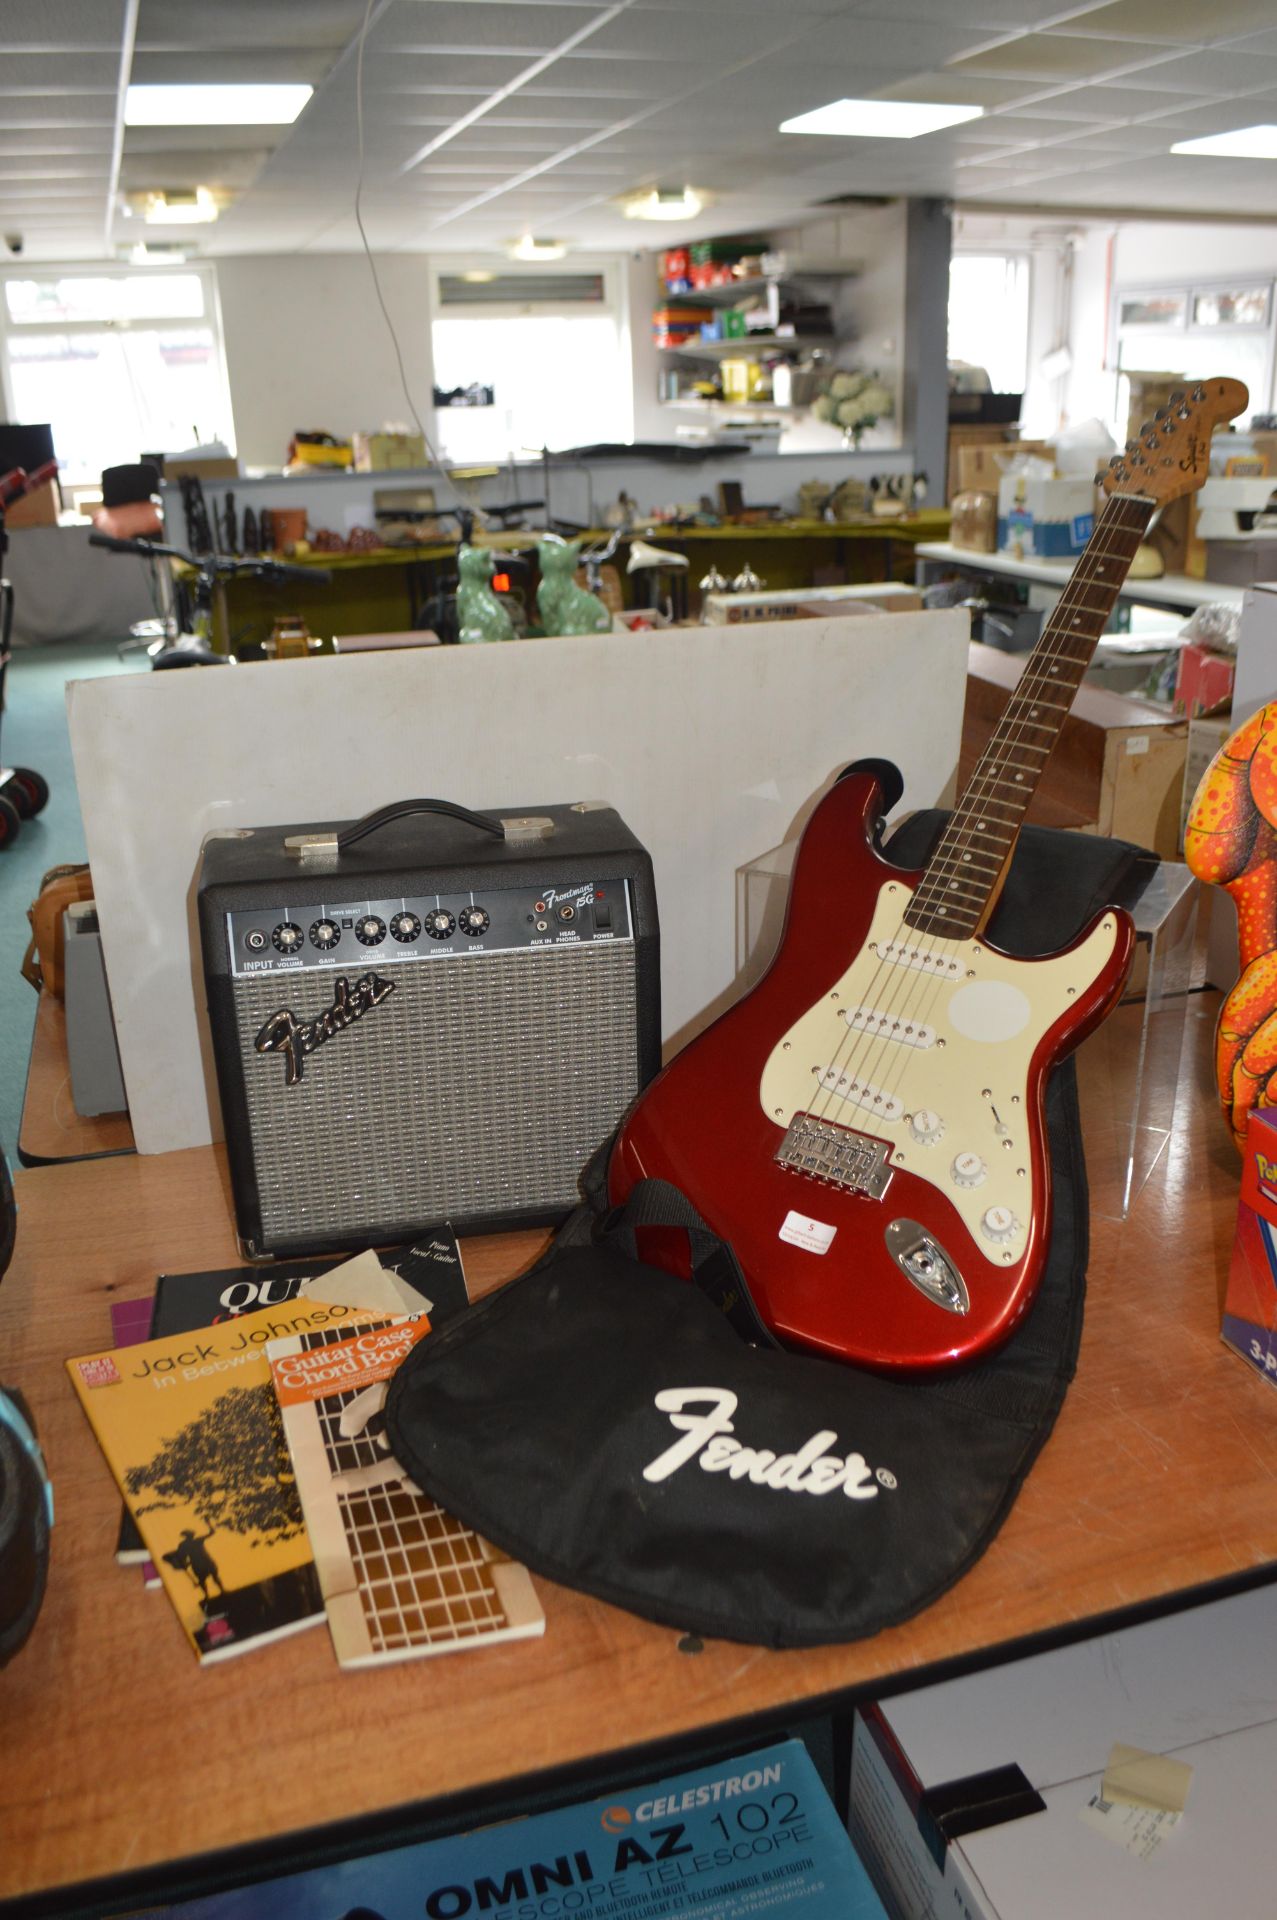 Fender Squier Stratocaster Electric Guitar plus Frontman 15G Amplifier, and Sing Books